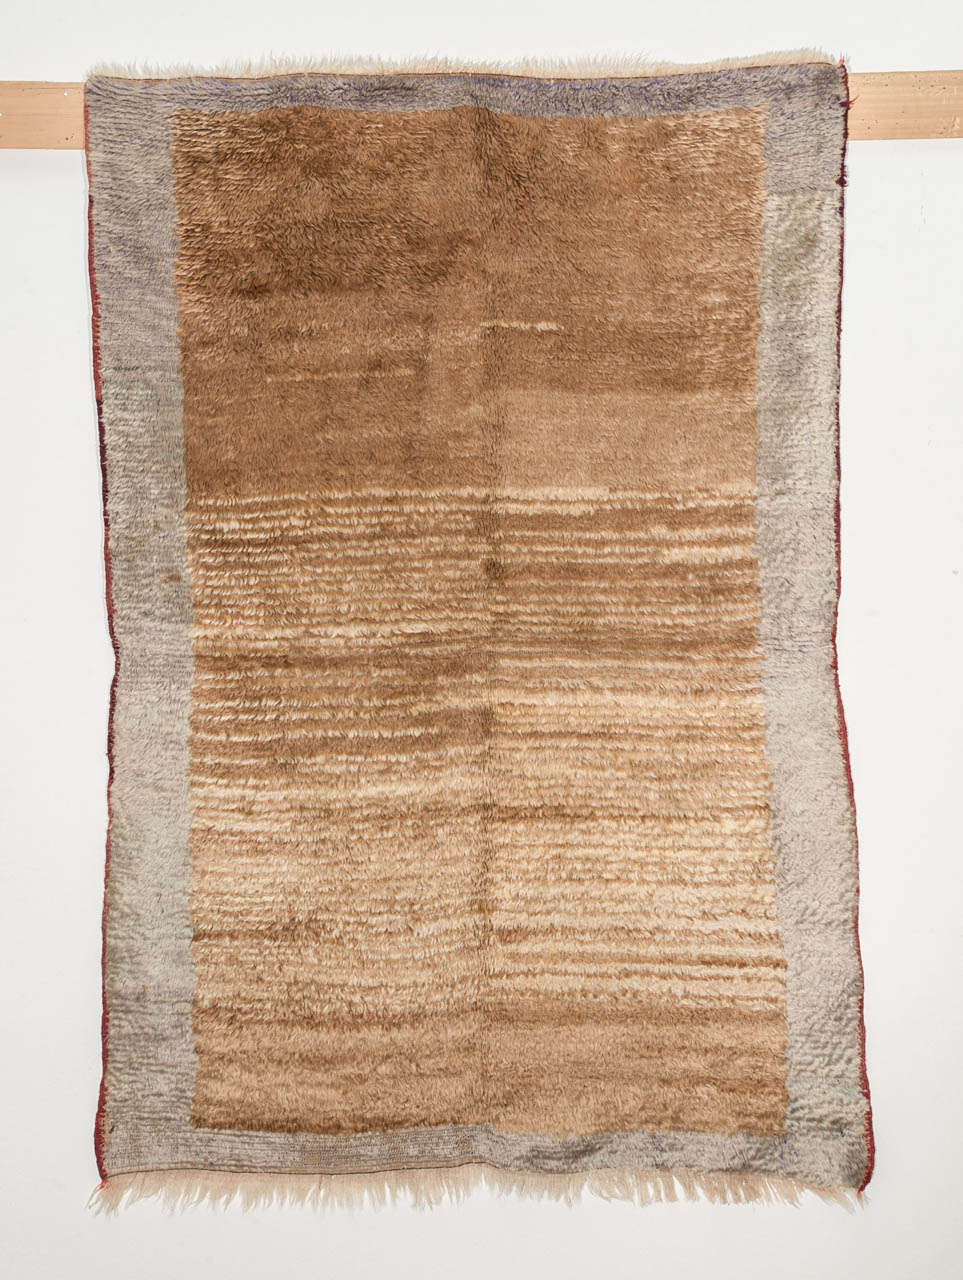 A rare and early Tulu woven using the finest Angora wool, resulting in a finely woven rug with a silky texture and a blanket-like handle.
Examples of this type represent the pinnacle of the Primitive pile weaving tradition, and were woven by the